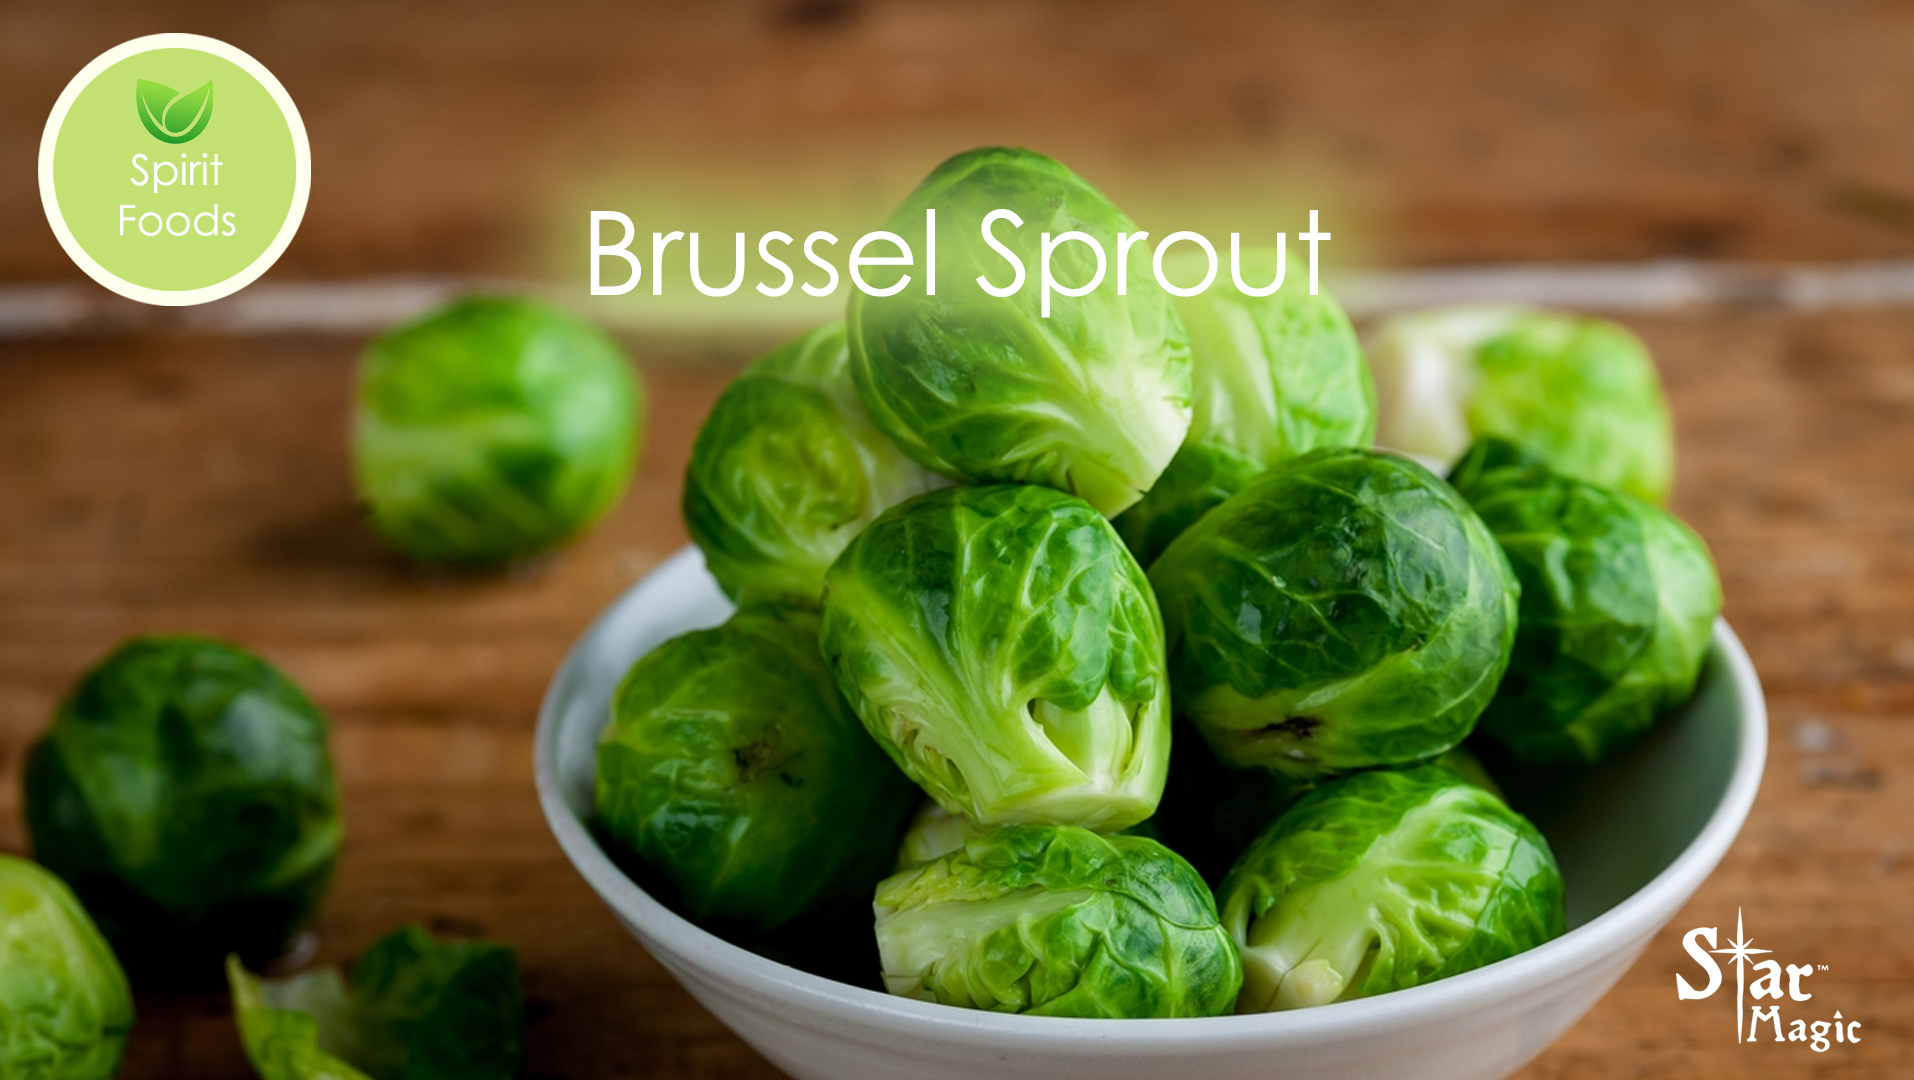 Spirit Food – Brussel Sprouts